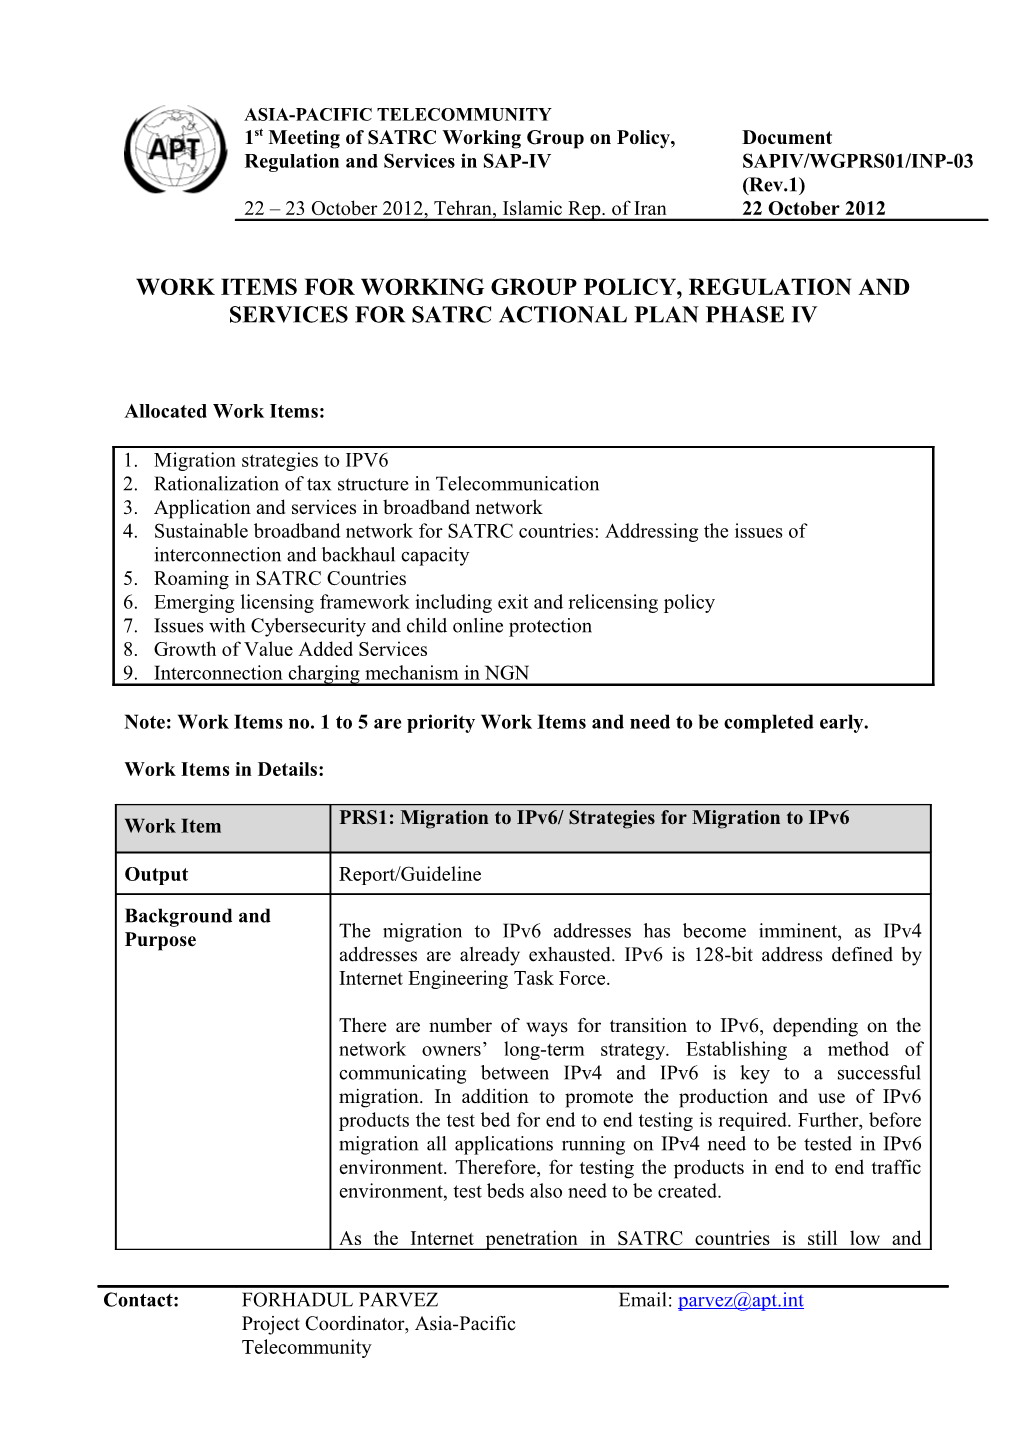 Work Items Forworking Group Policy, Regulation and Services for Satrc Actional Plan Phase Iv